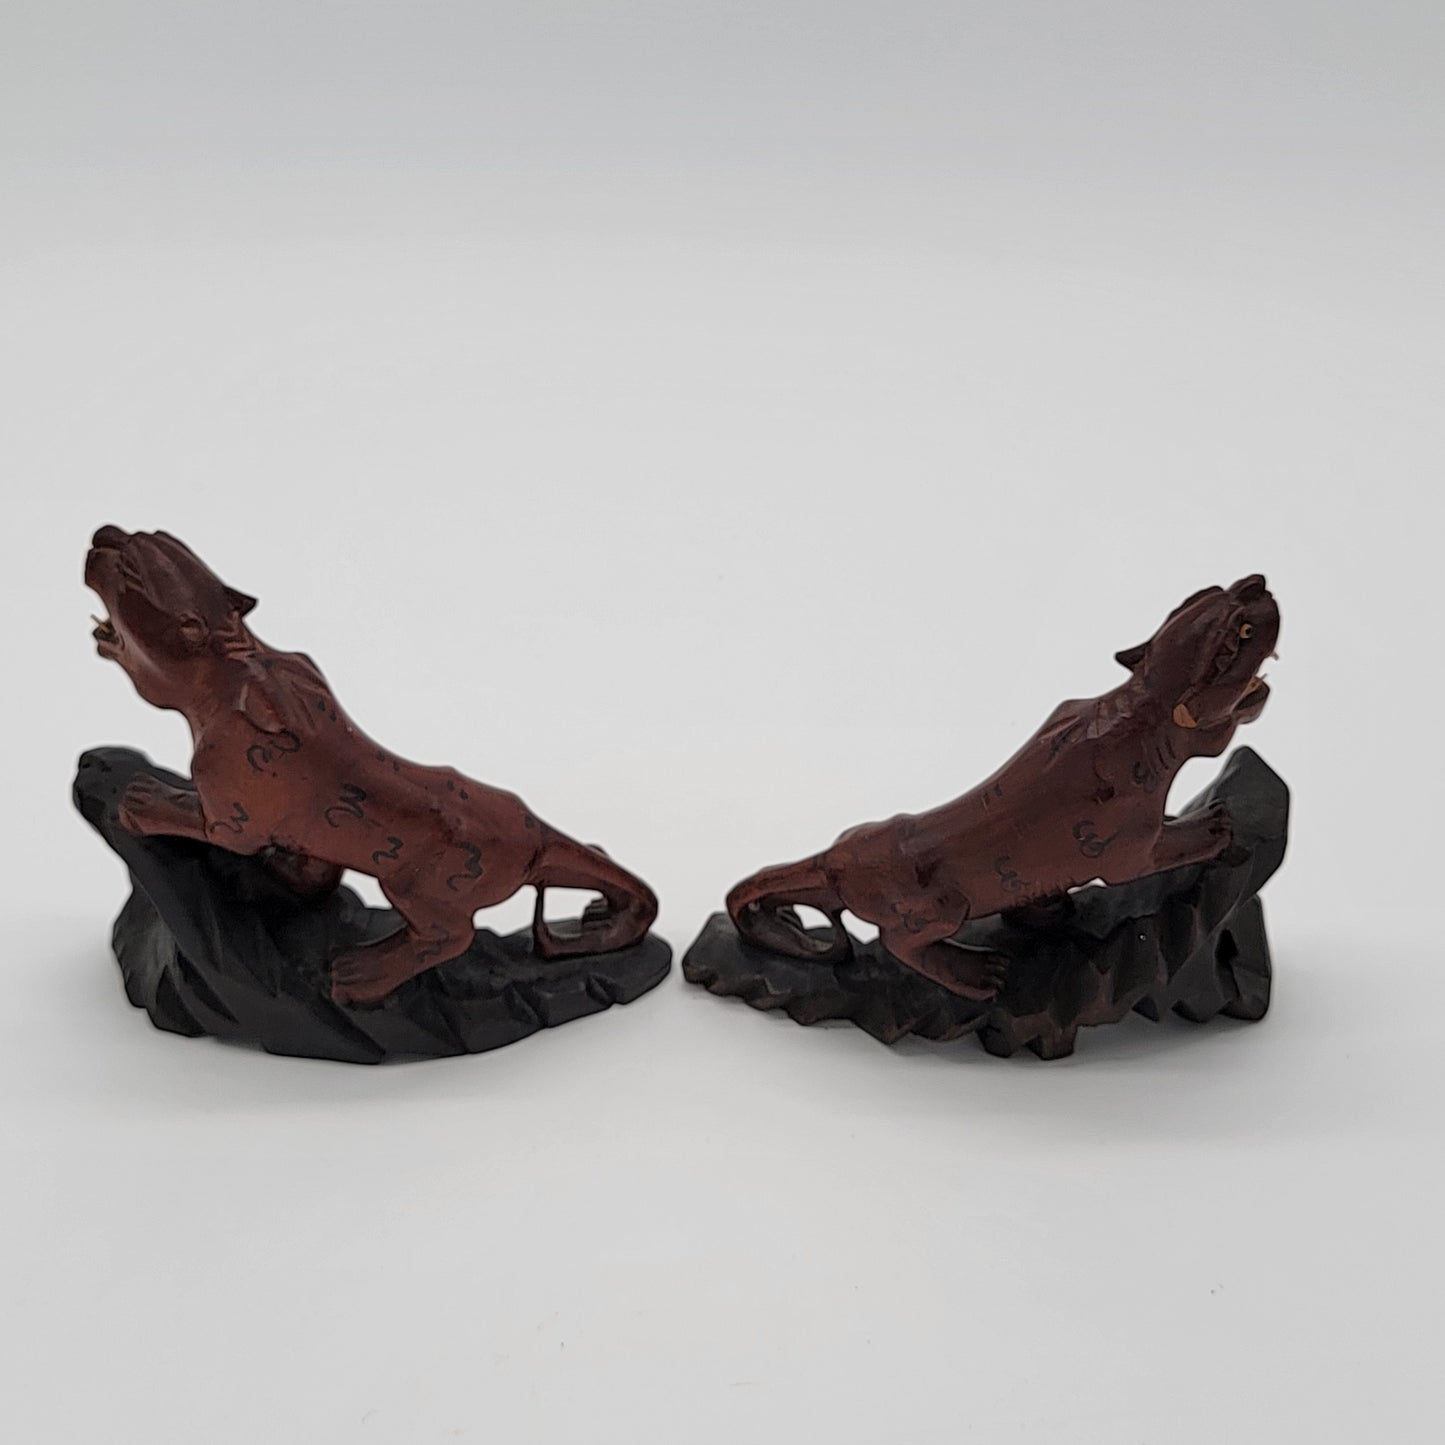 Pair of Antique Hand-Carved Rosewood Tigers with Glass Eyes